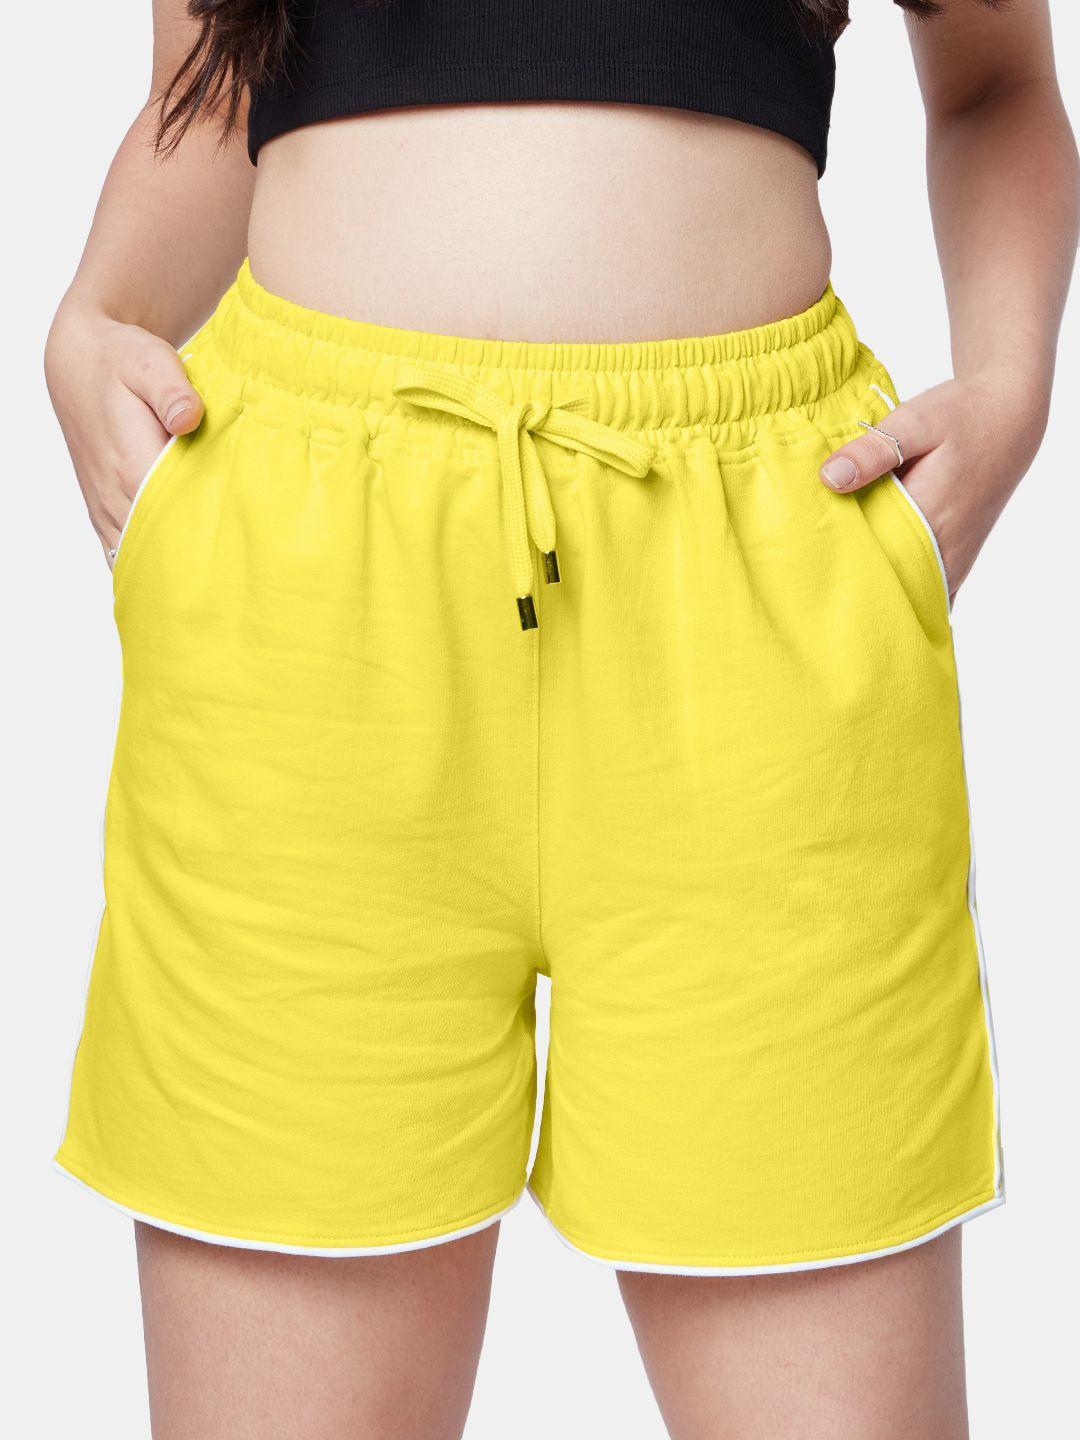 the-souled-store-women-yellow-mid-rise-sports-shorts